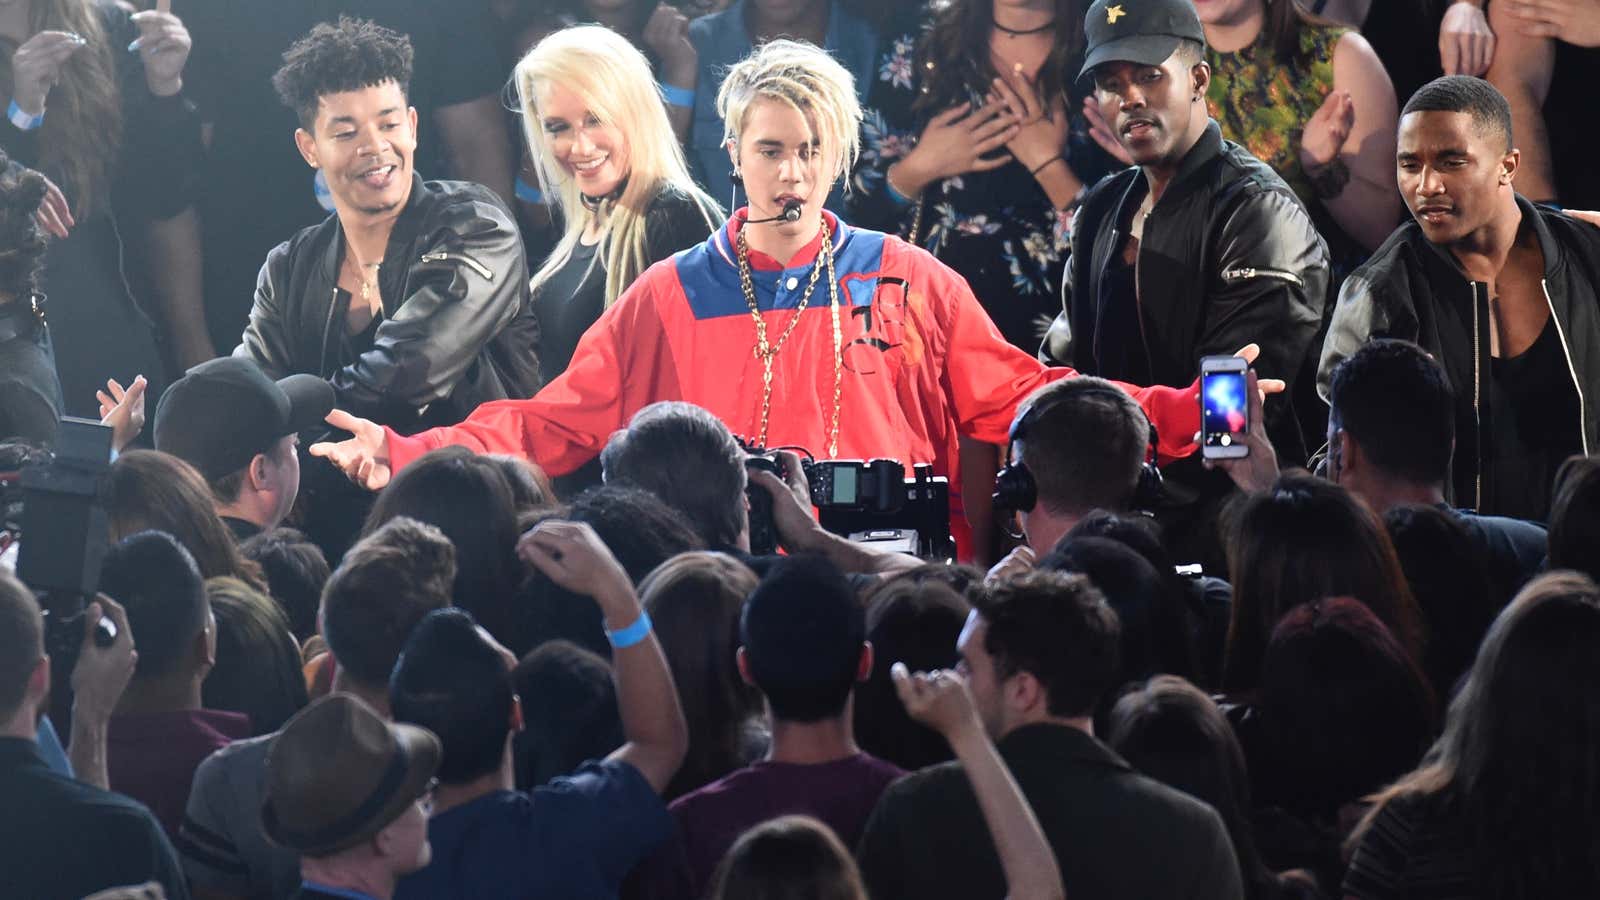 Is Bieber’s latest hairstyle appropriation?